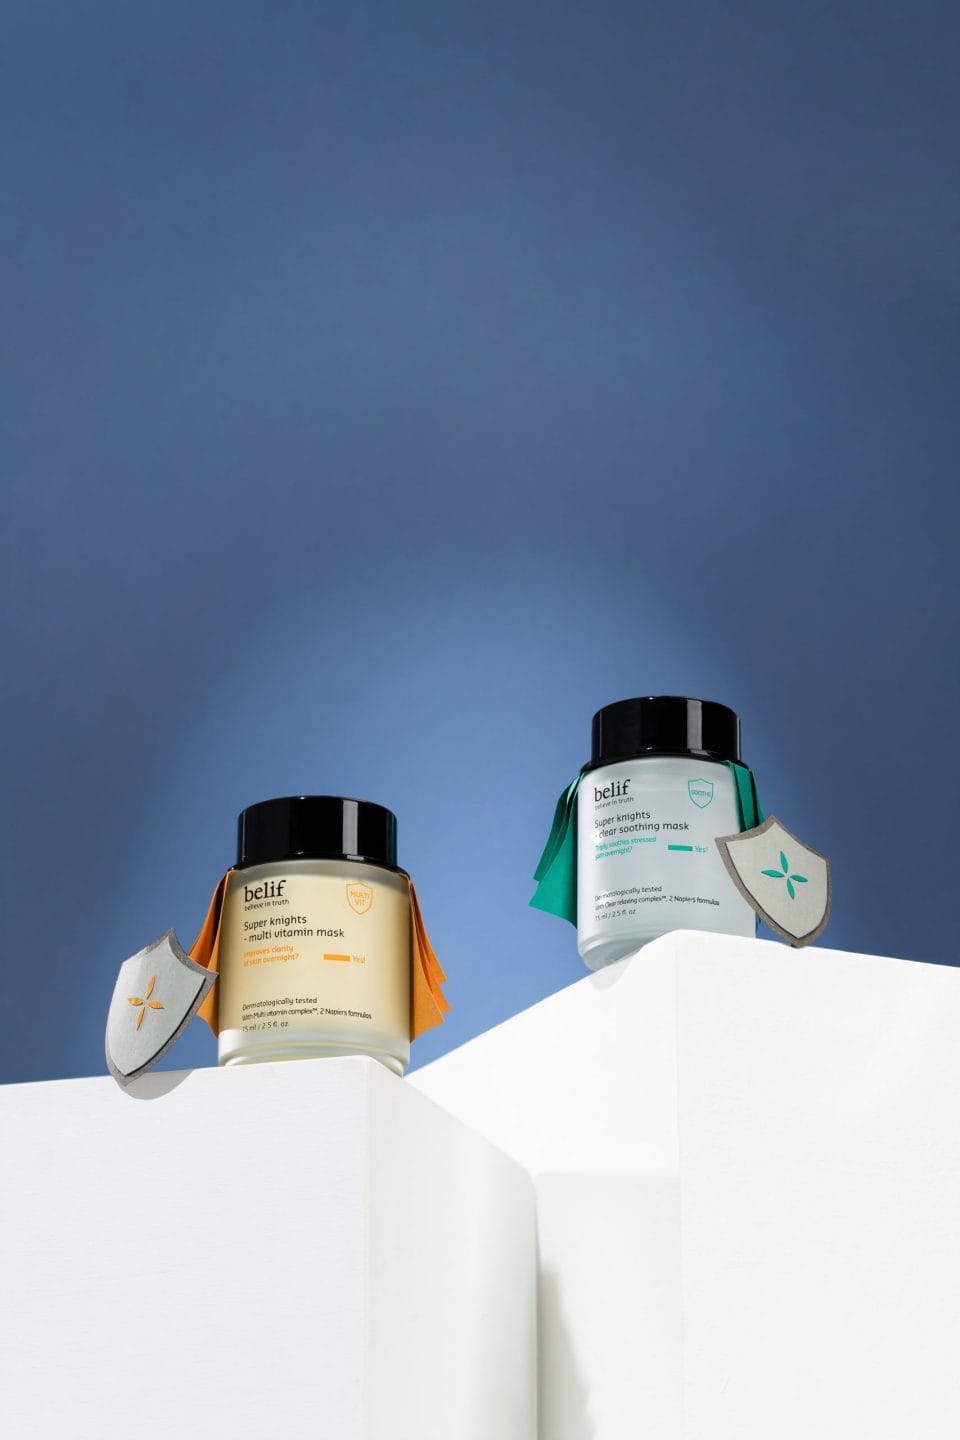 The Limited Edition Skincare, Heavy Hitters, And the New Holy Grails